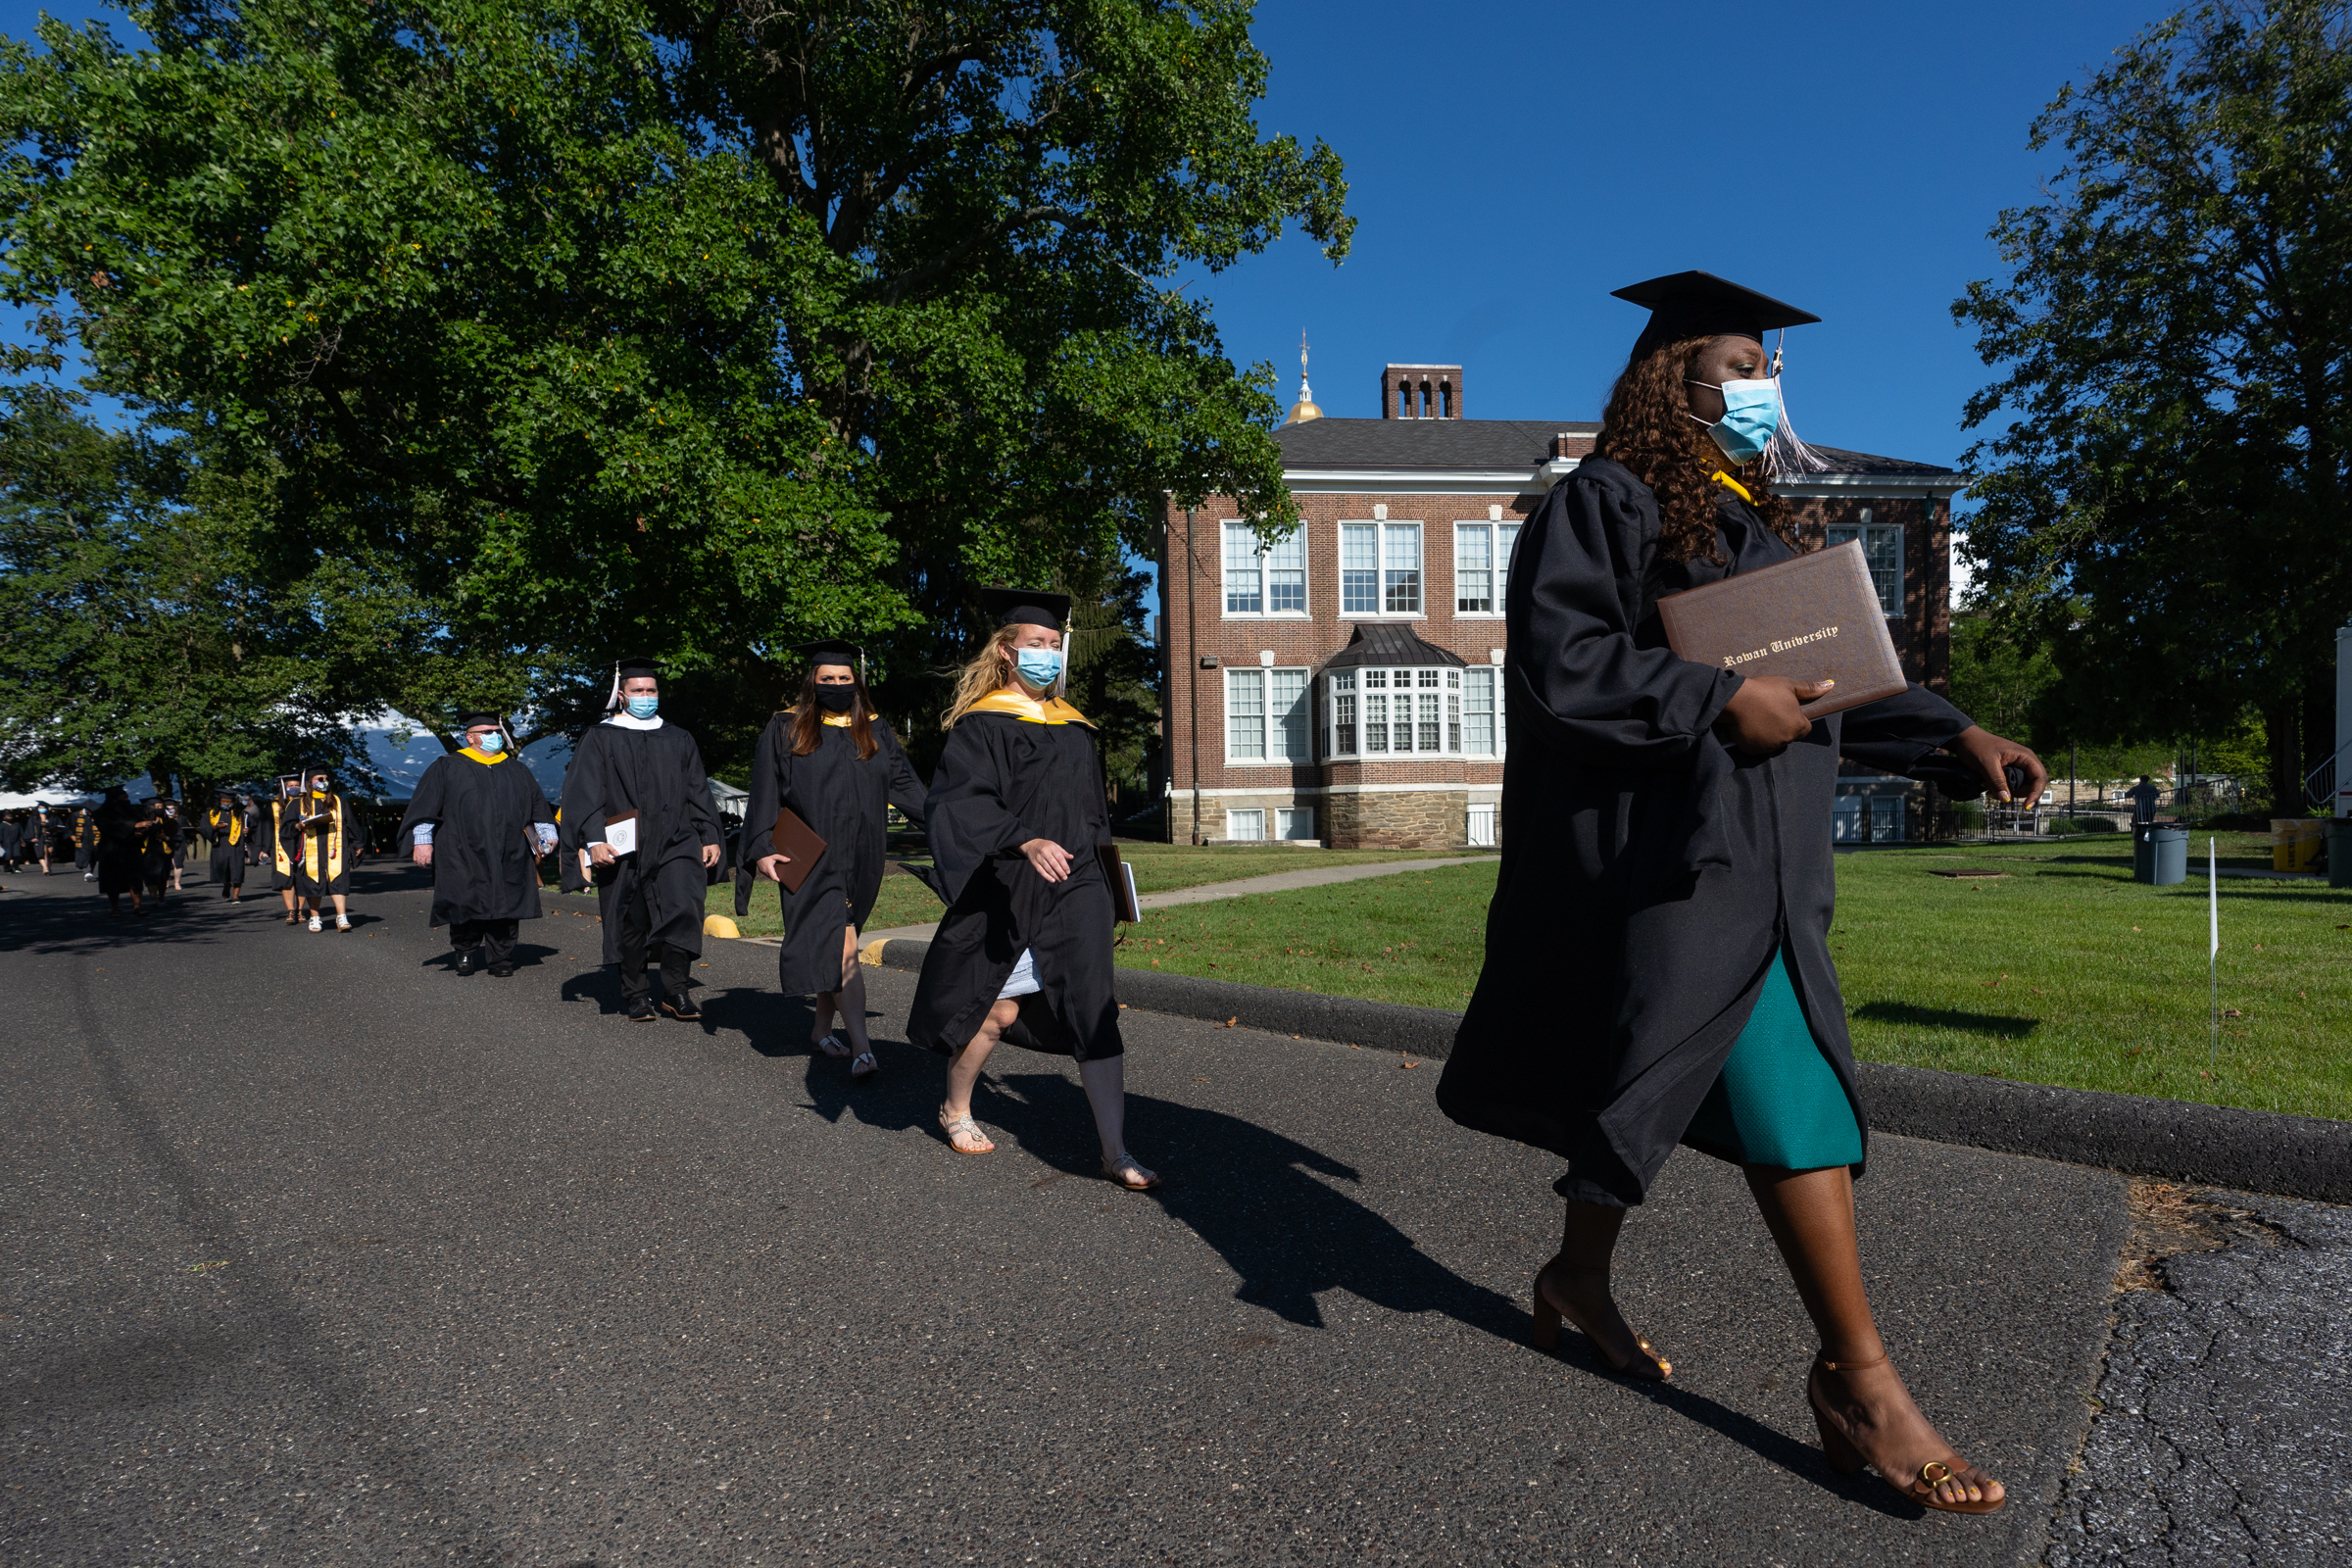 Rowan University is among first in the region to hold in-person